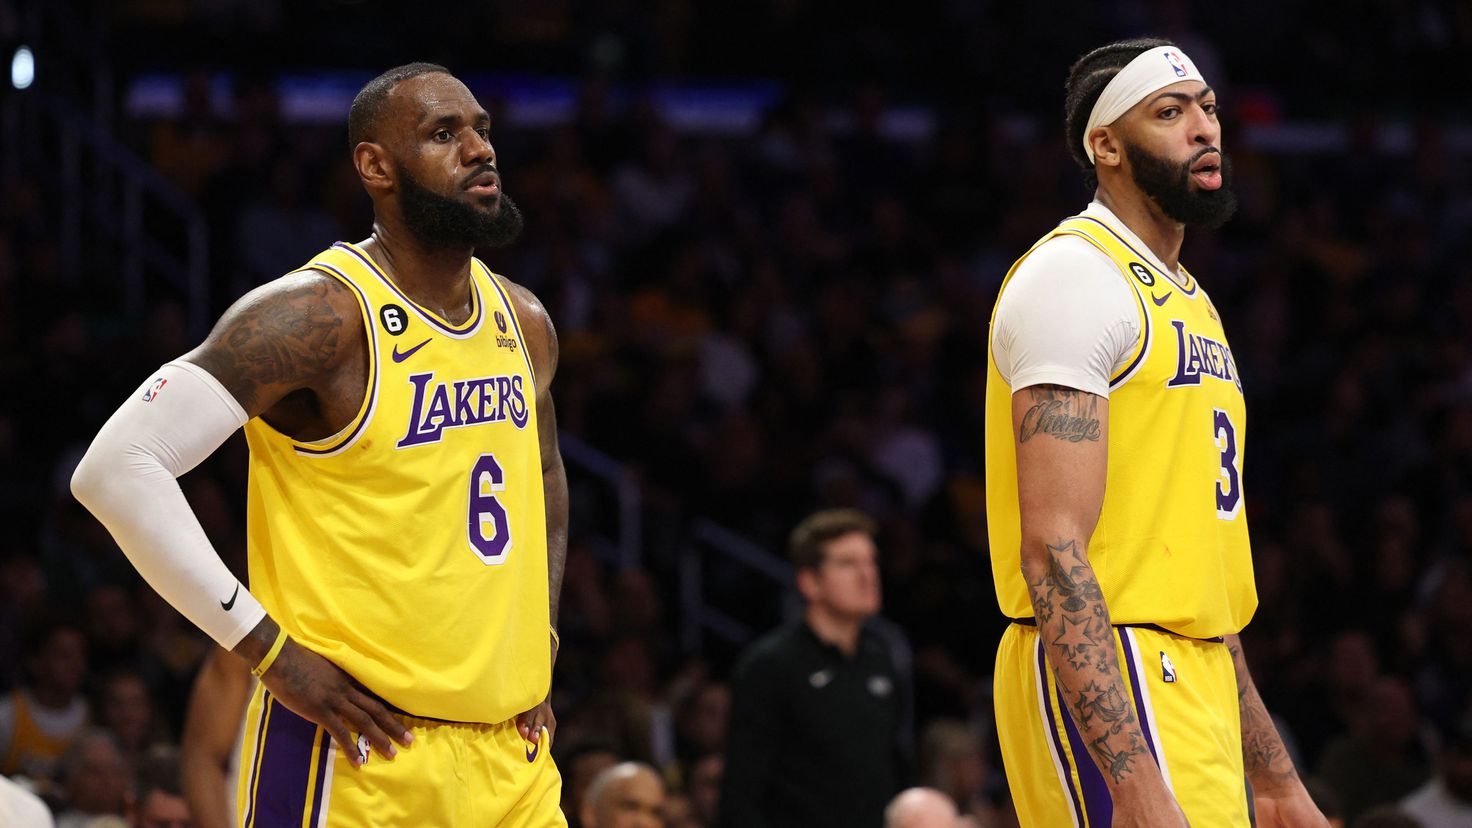 The 4 immovable players the Lakers must keep, according to Magic Johnson
